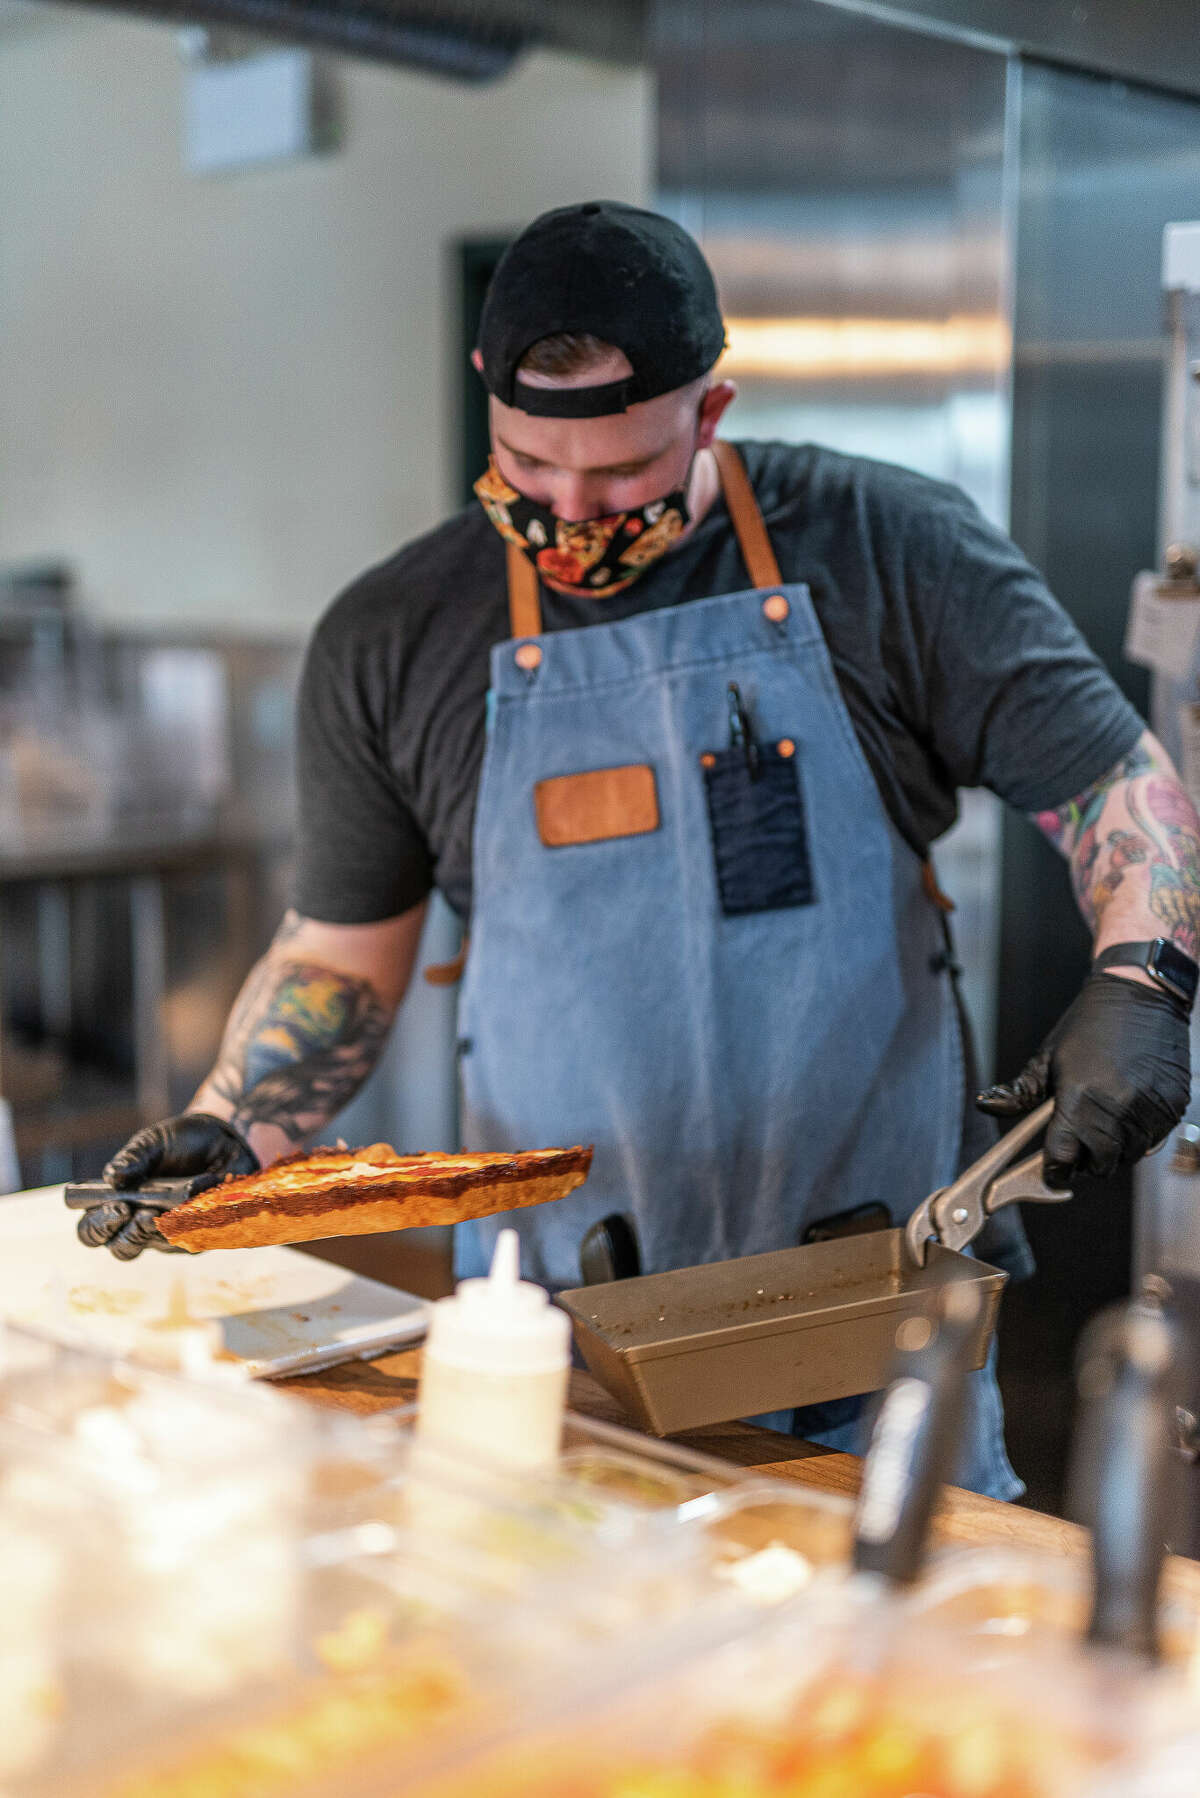 “I would invite people who are wary of Poughkeepsie to come and see the awesome changes happening up here,” says Charlie Webb, owner of Detroit-style pizzeria Hudson & Packard, who just wowed pizza judges in Las Vegas.